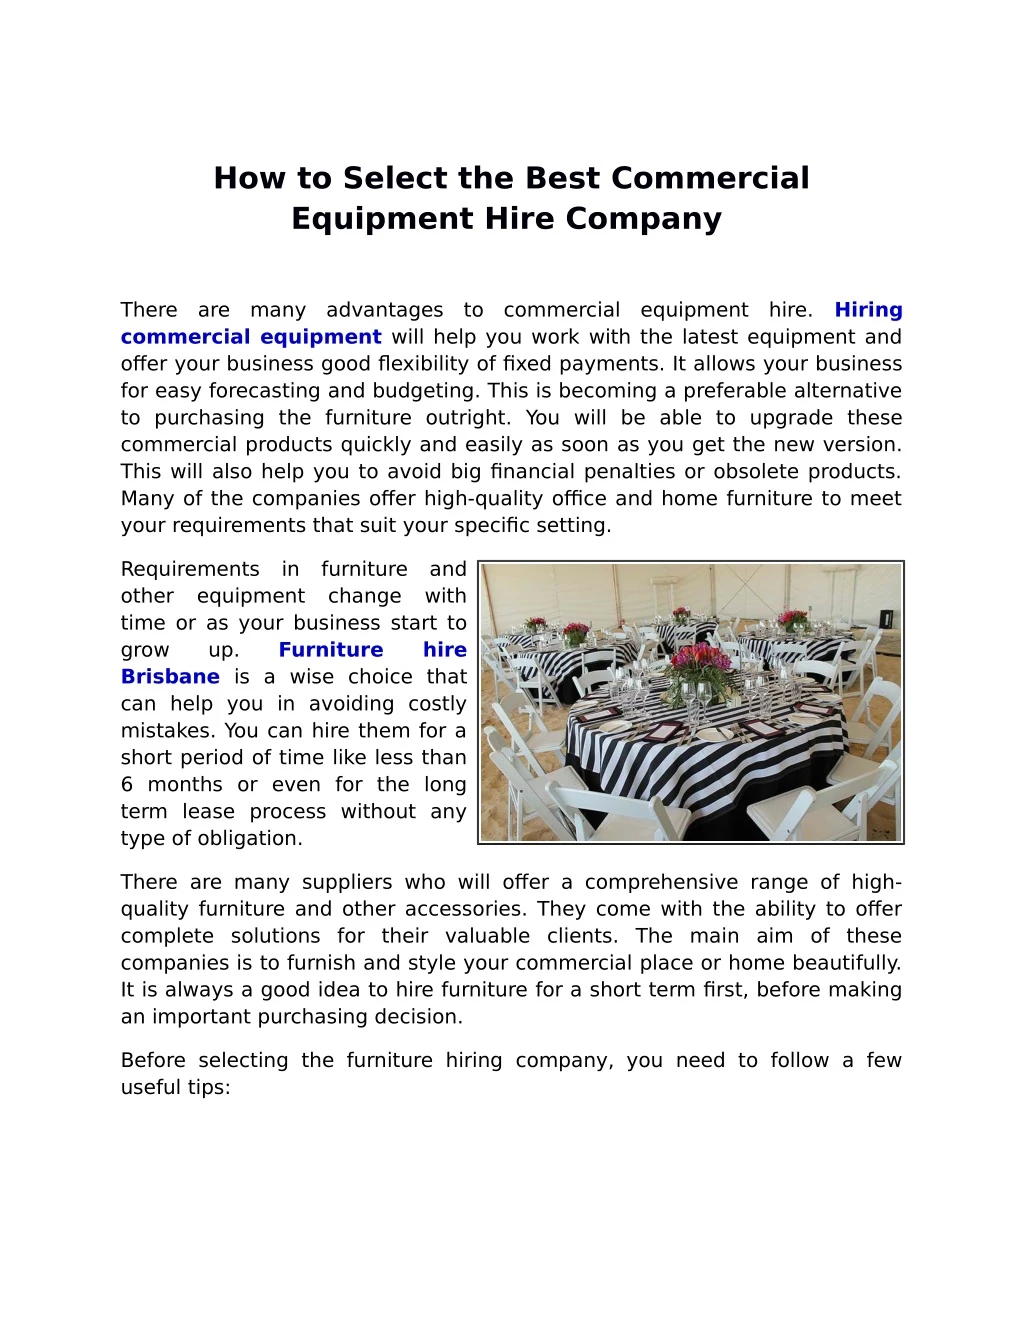 how to select the best commercial equipment hire